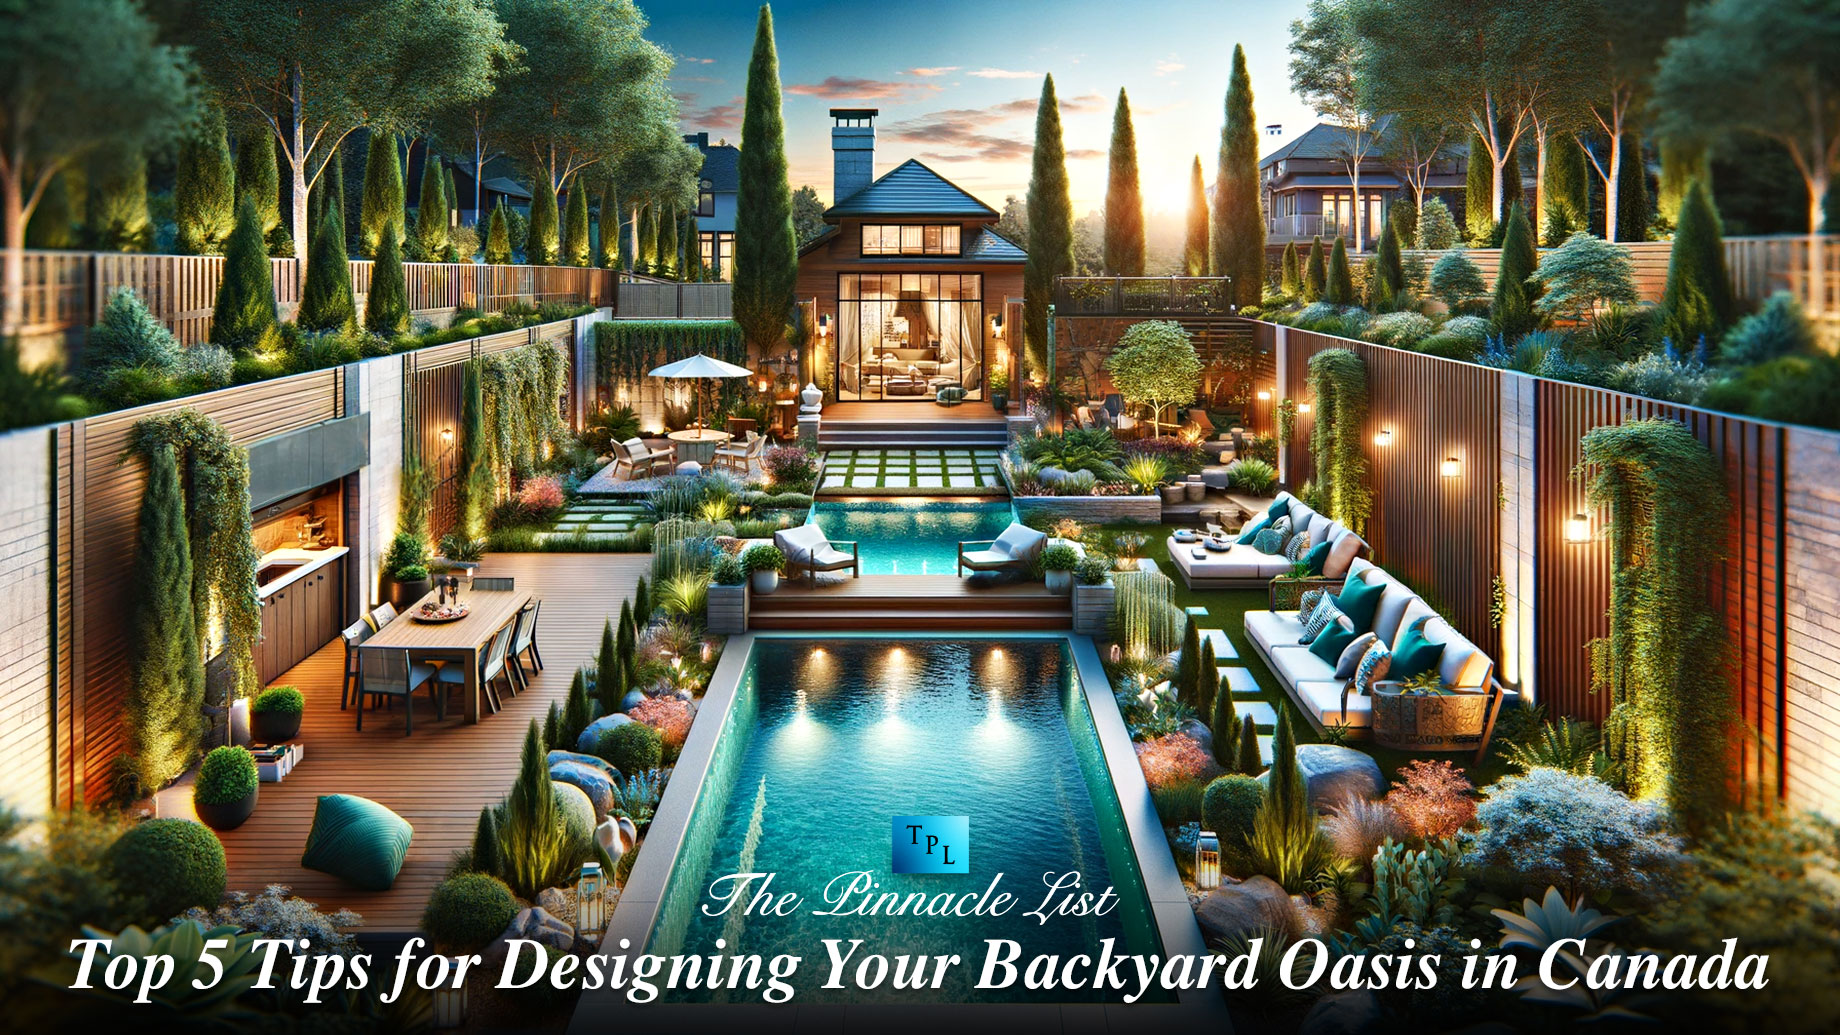 Top 5 Tips for Designing Your Backyard Oasis in Canada